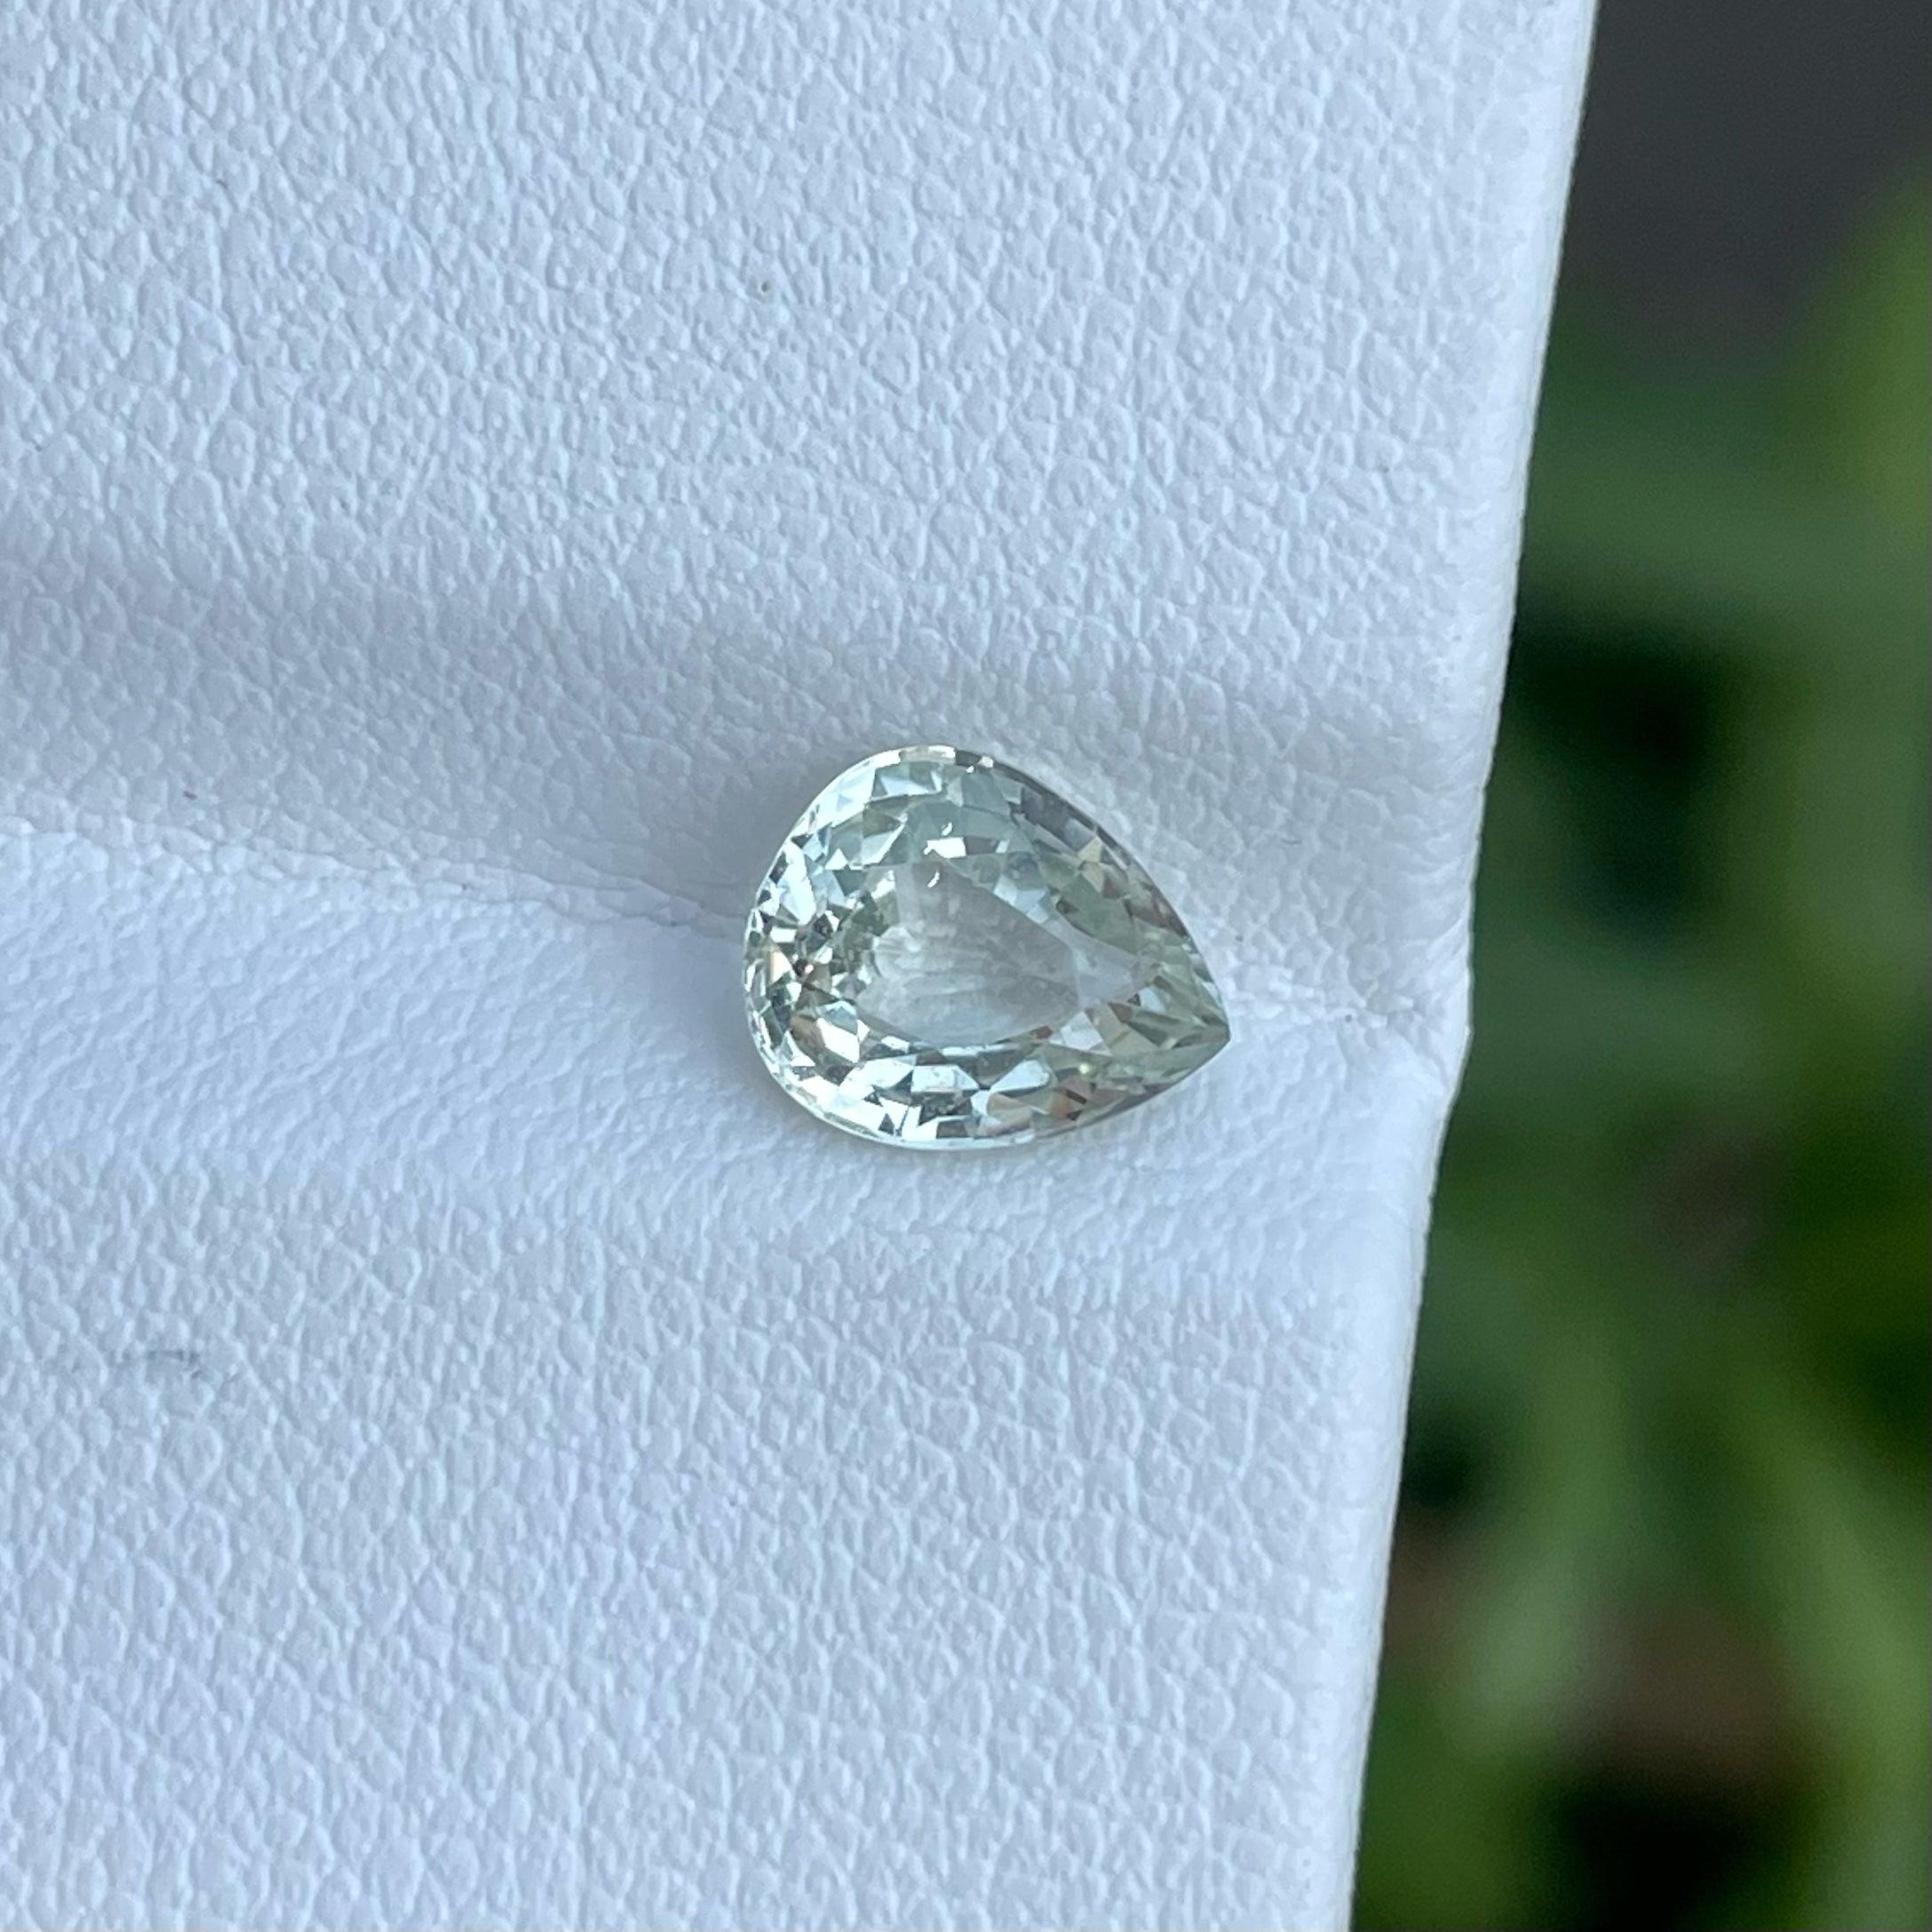 Nature Rare White Sapphire Loose Stone, Available For Sale At Whiting Price Natural High Quality VVS Clarity 1.75 Carats Heated Sapphire From Sri Lanka.

Informations sur le produit :
TYPE DE GEMSTONE :	Nature Rare White Sapphire Loose Stone (Saphir